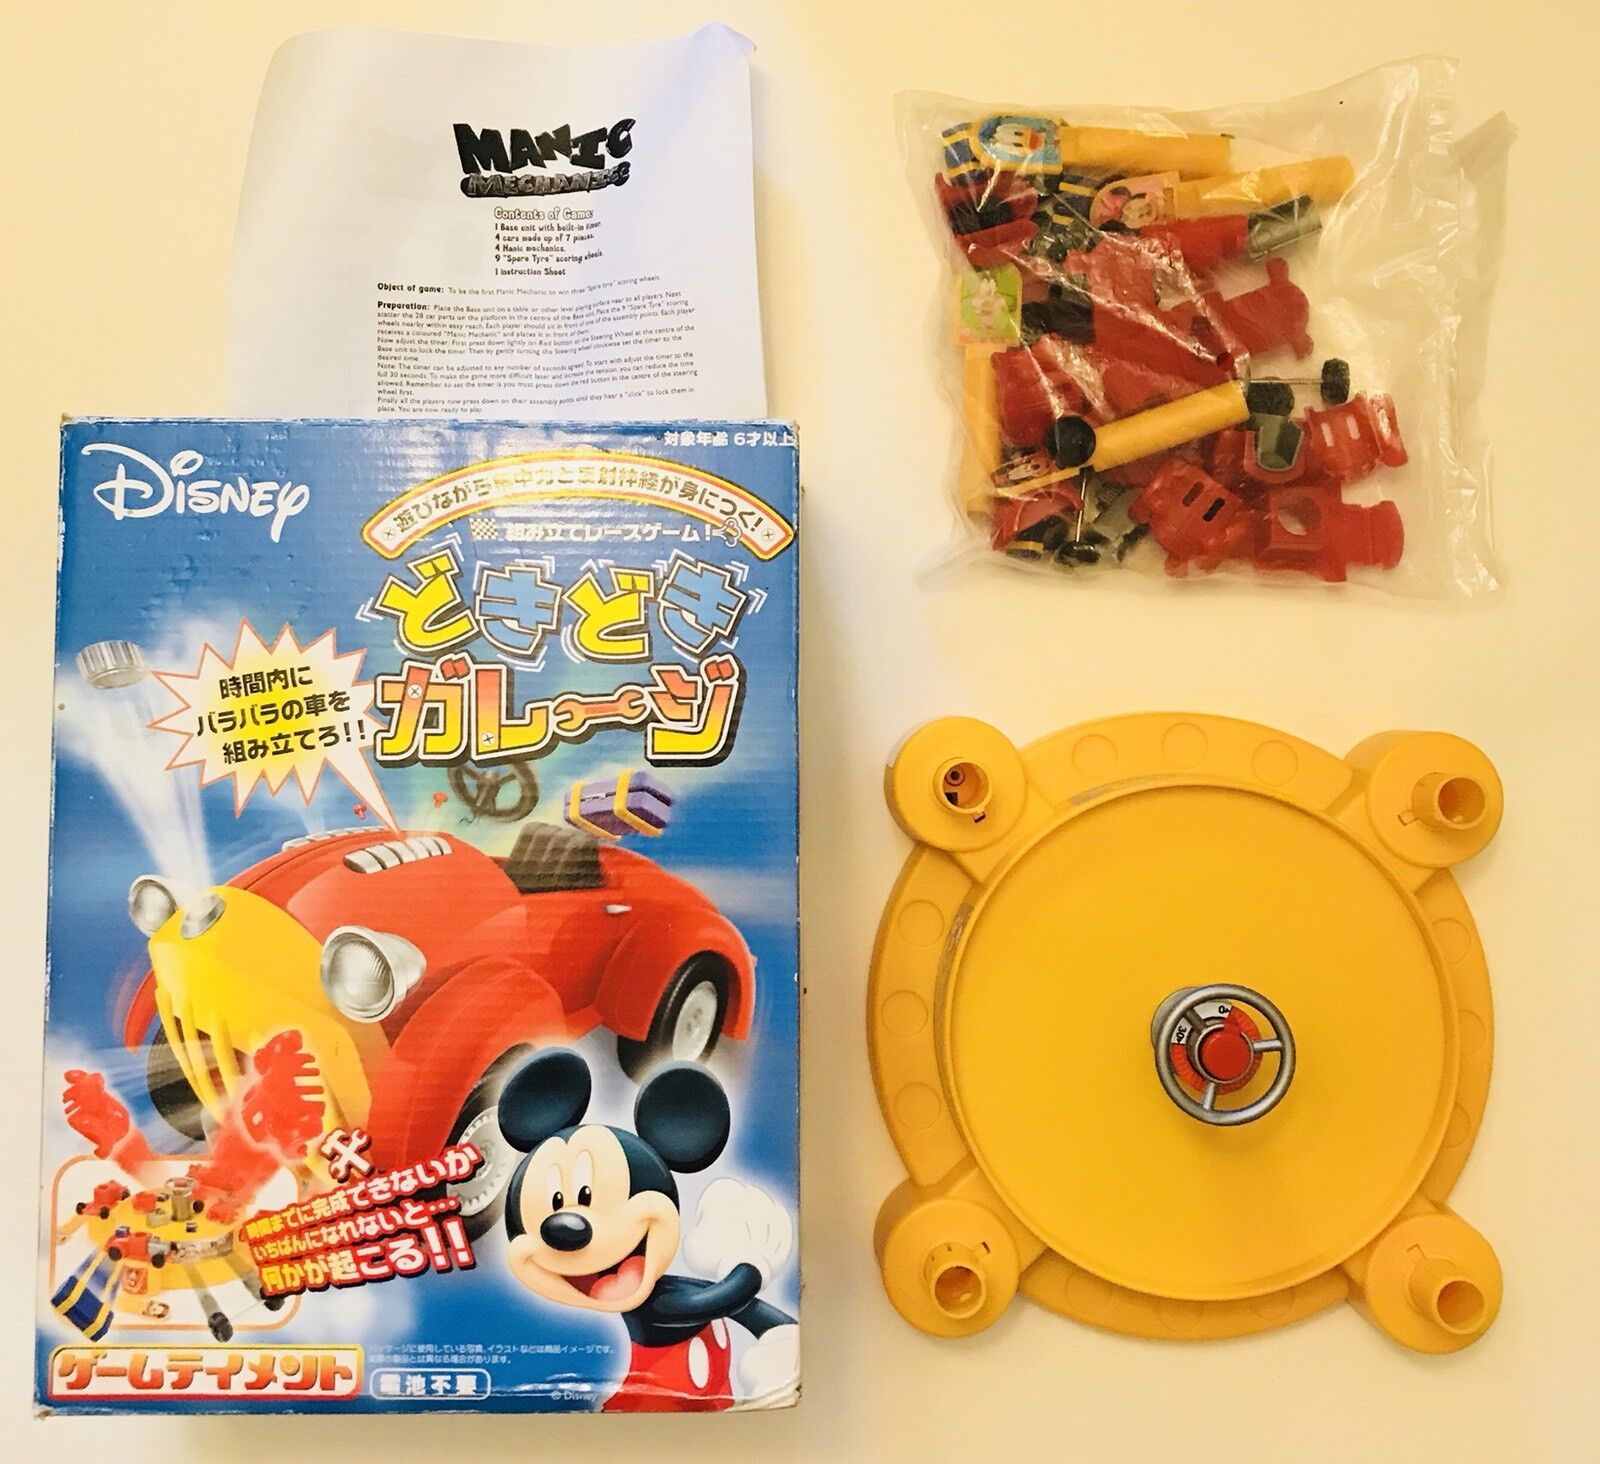 RARE IMPORT Tenyo Japan Disney Mickey Mouse Game: MANIC MECHANIC Complete